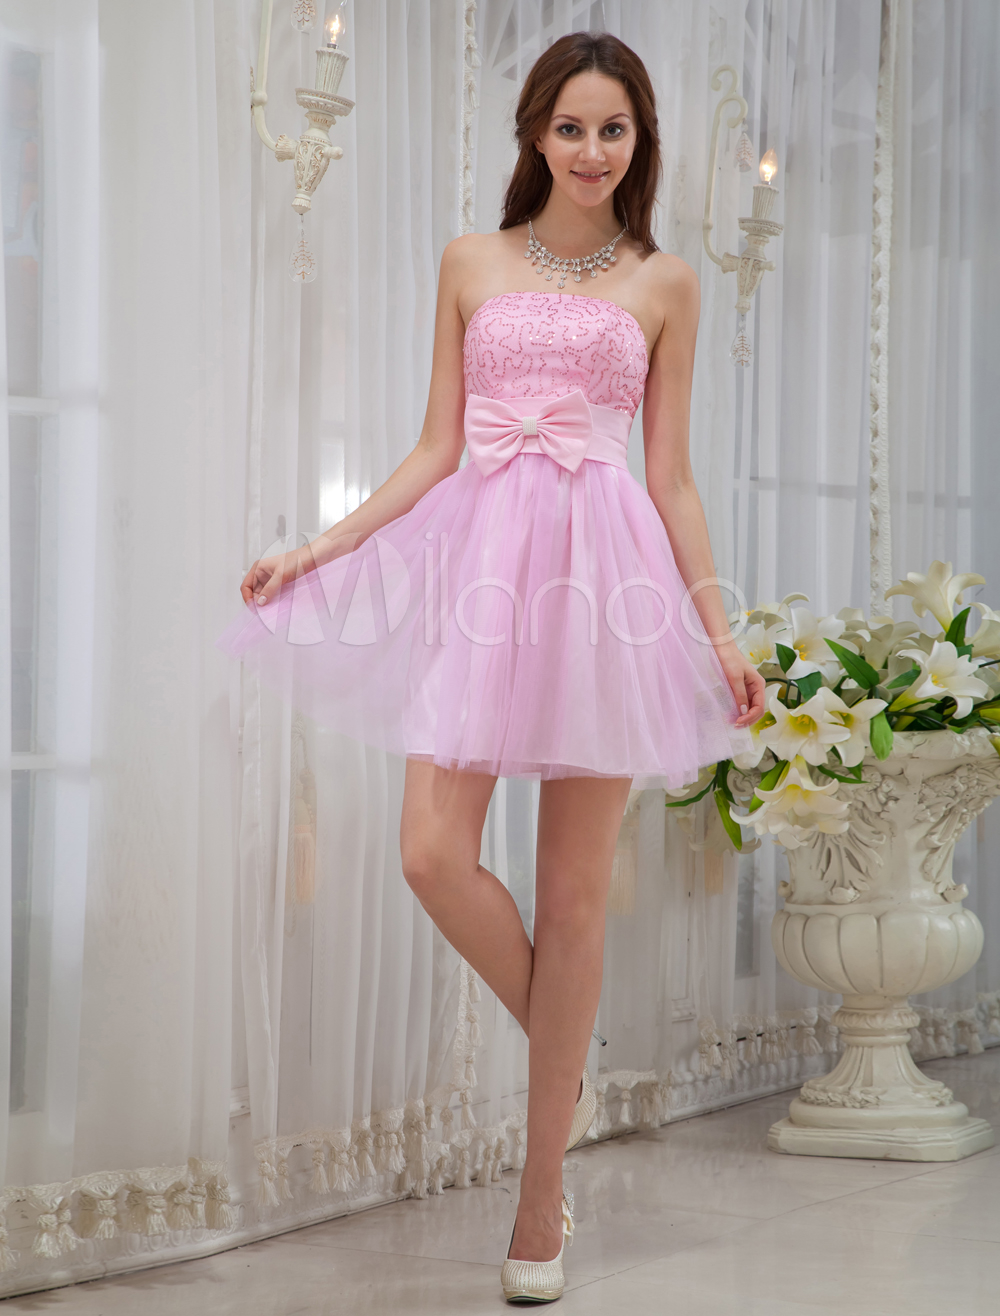 Pink Strapless Homecoming Dress with Sequin Details - Milanoo.com